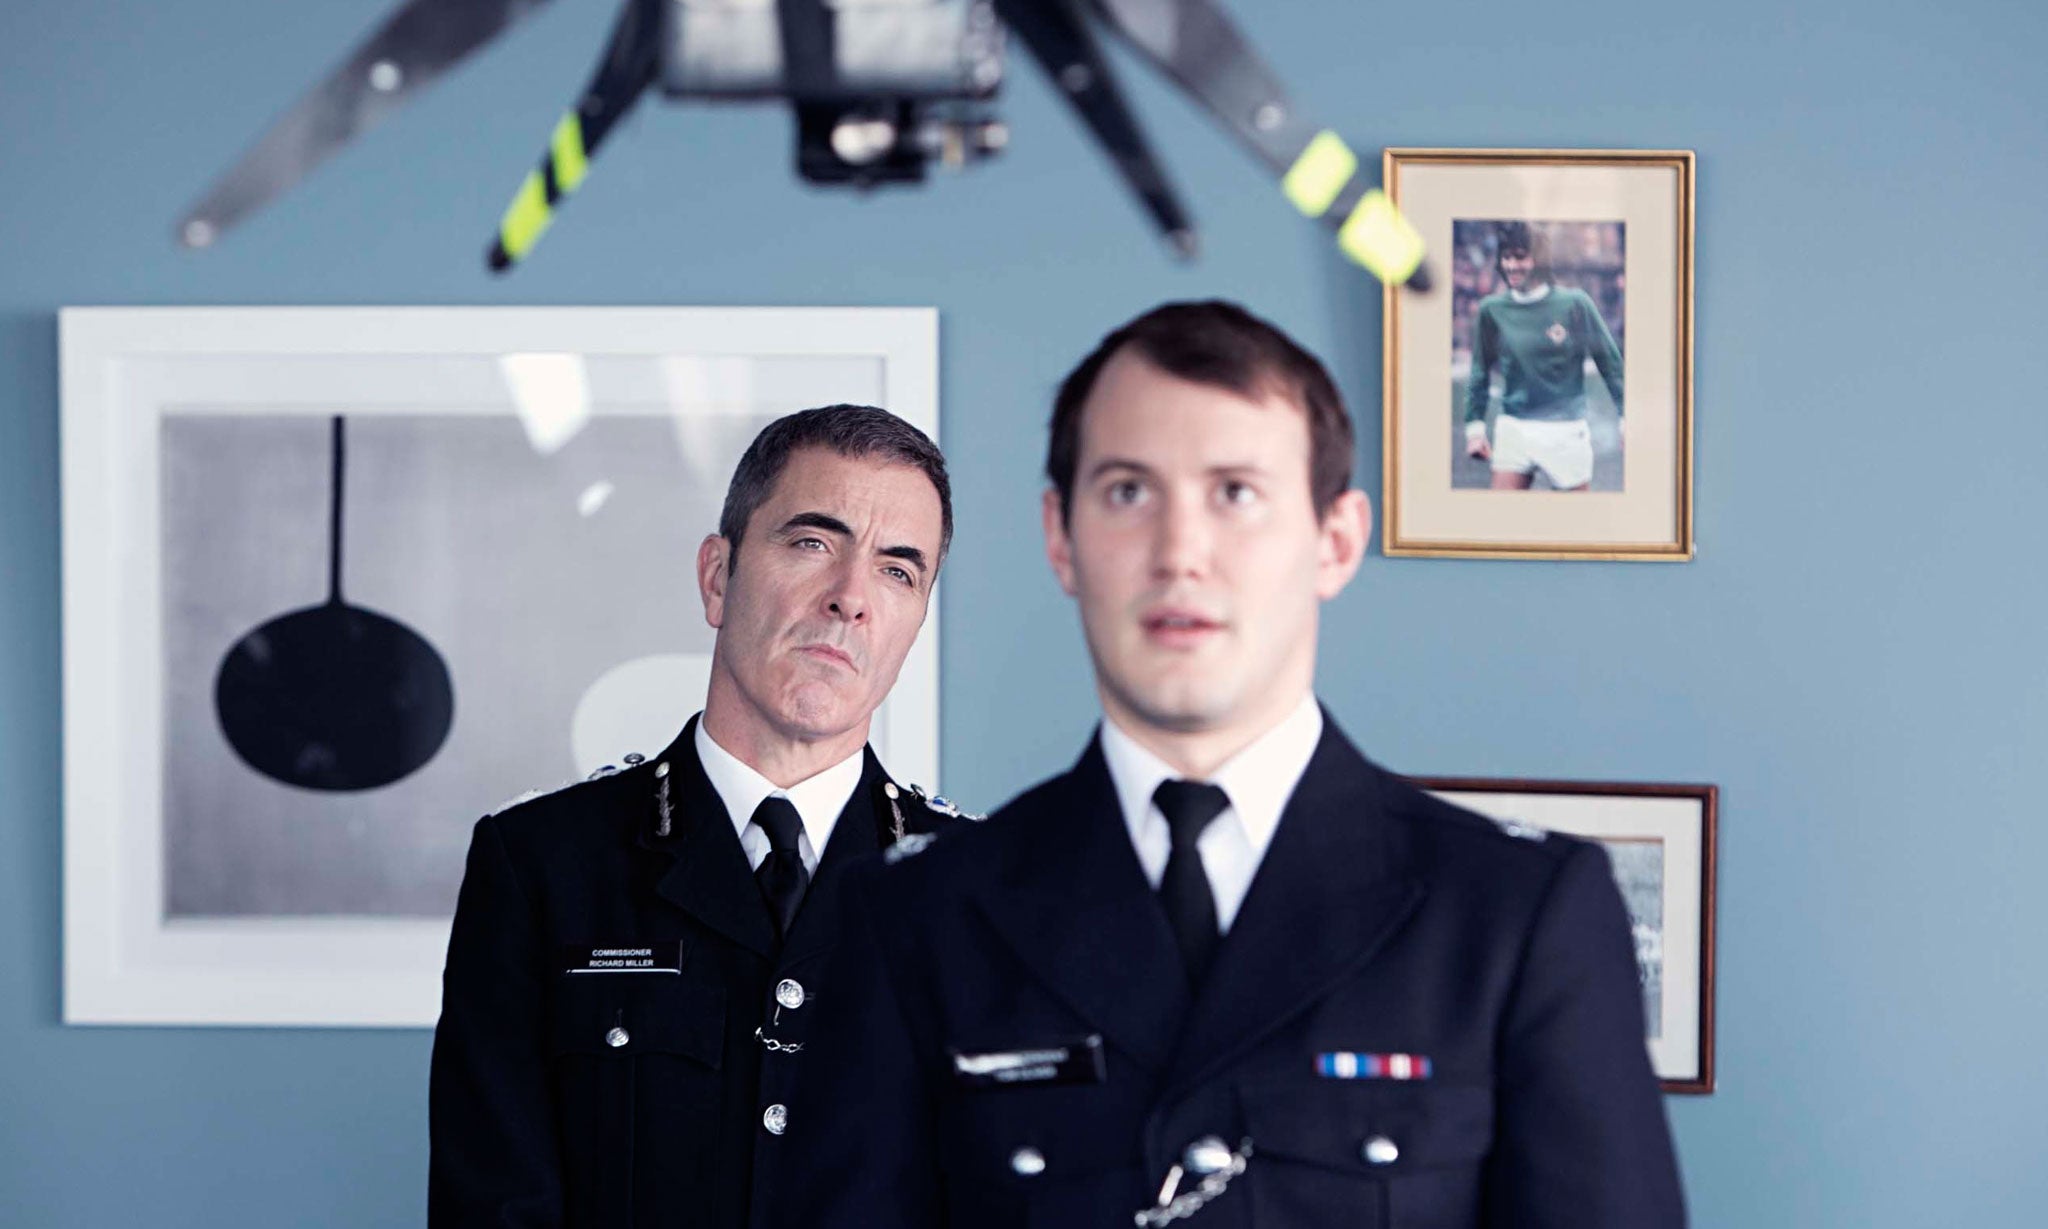 The duo's Channel 4 satire on modern policing, Babylon